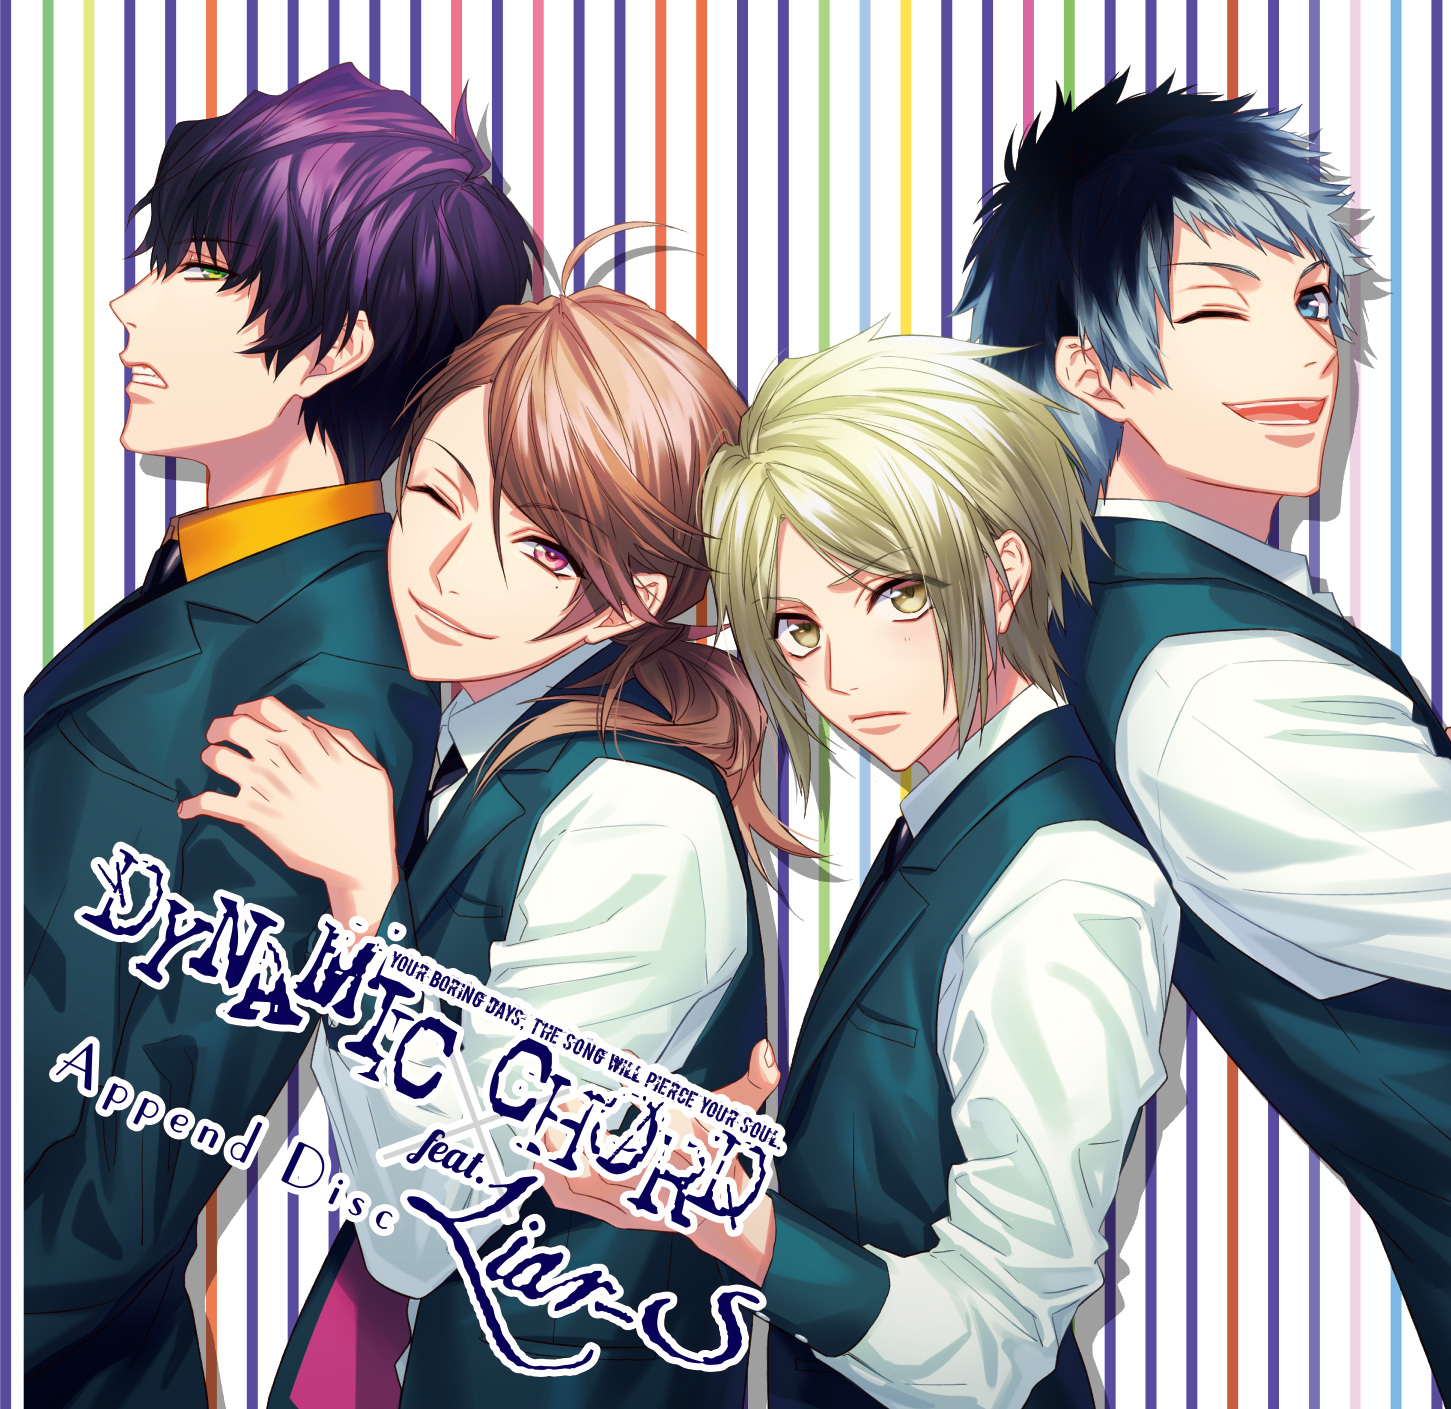 PCゲーム『DYNAMIC CHORD feat. Liar-S Append Disc』のスマホブラウザ